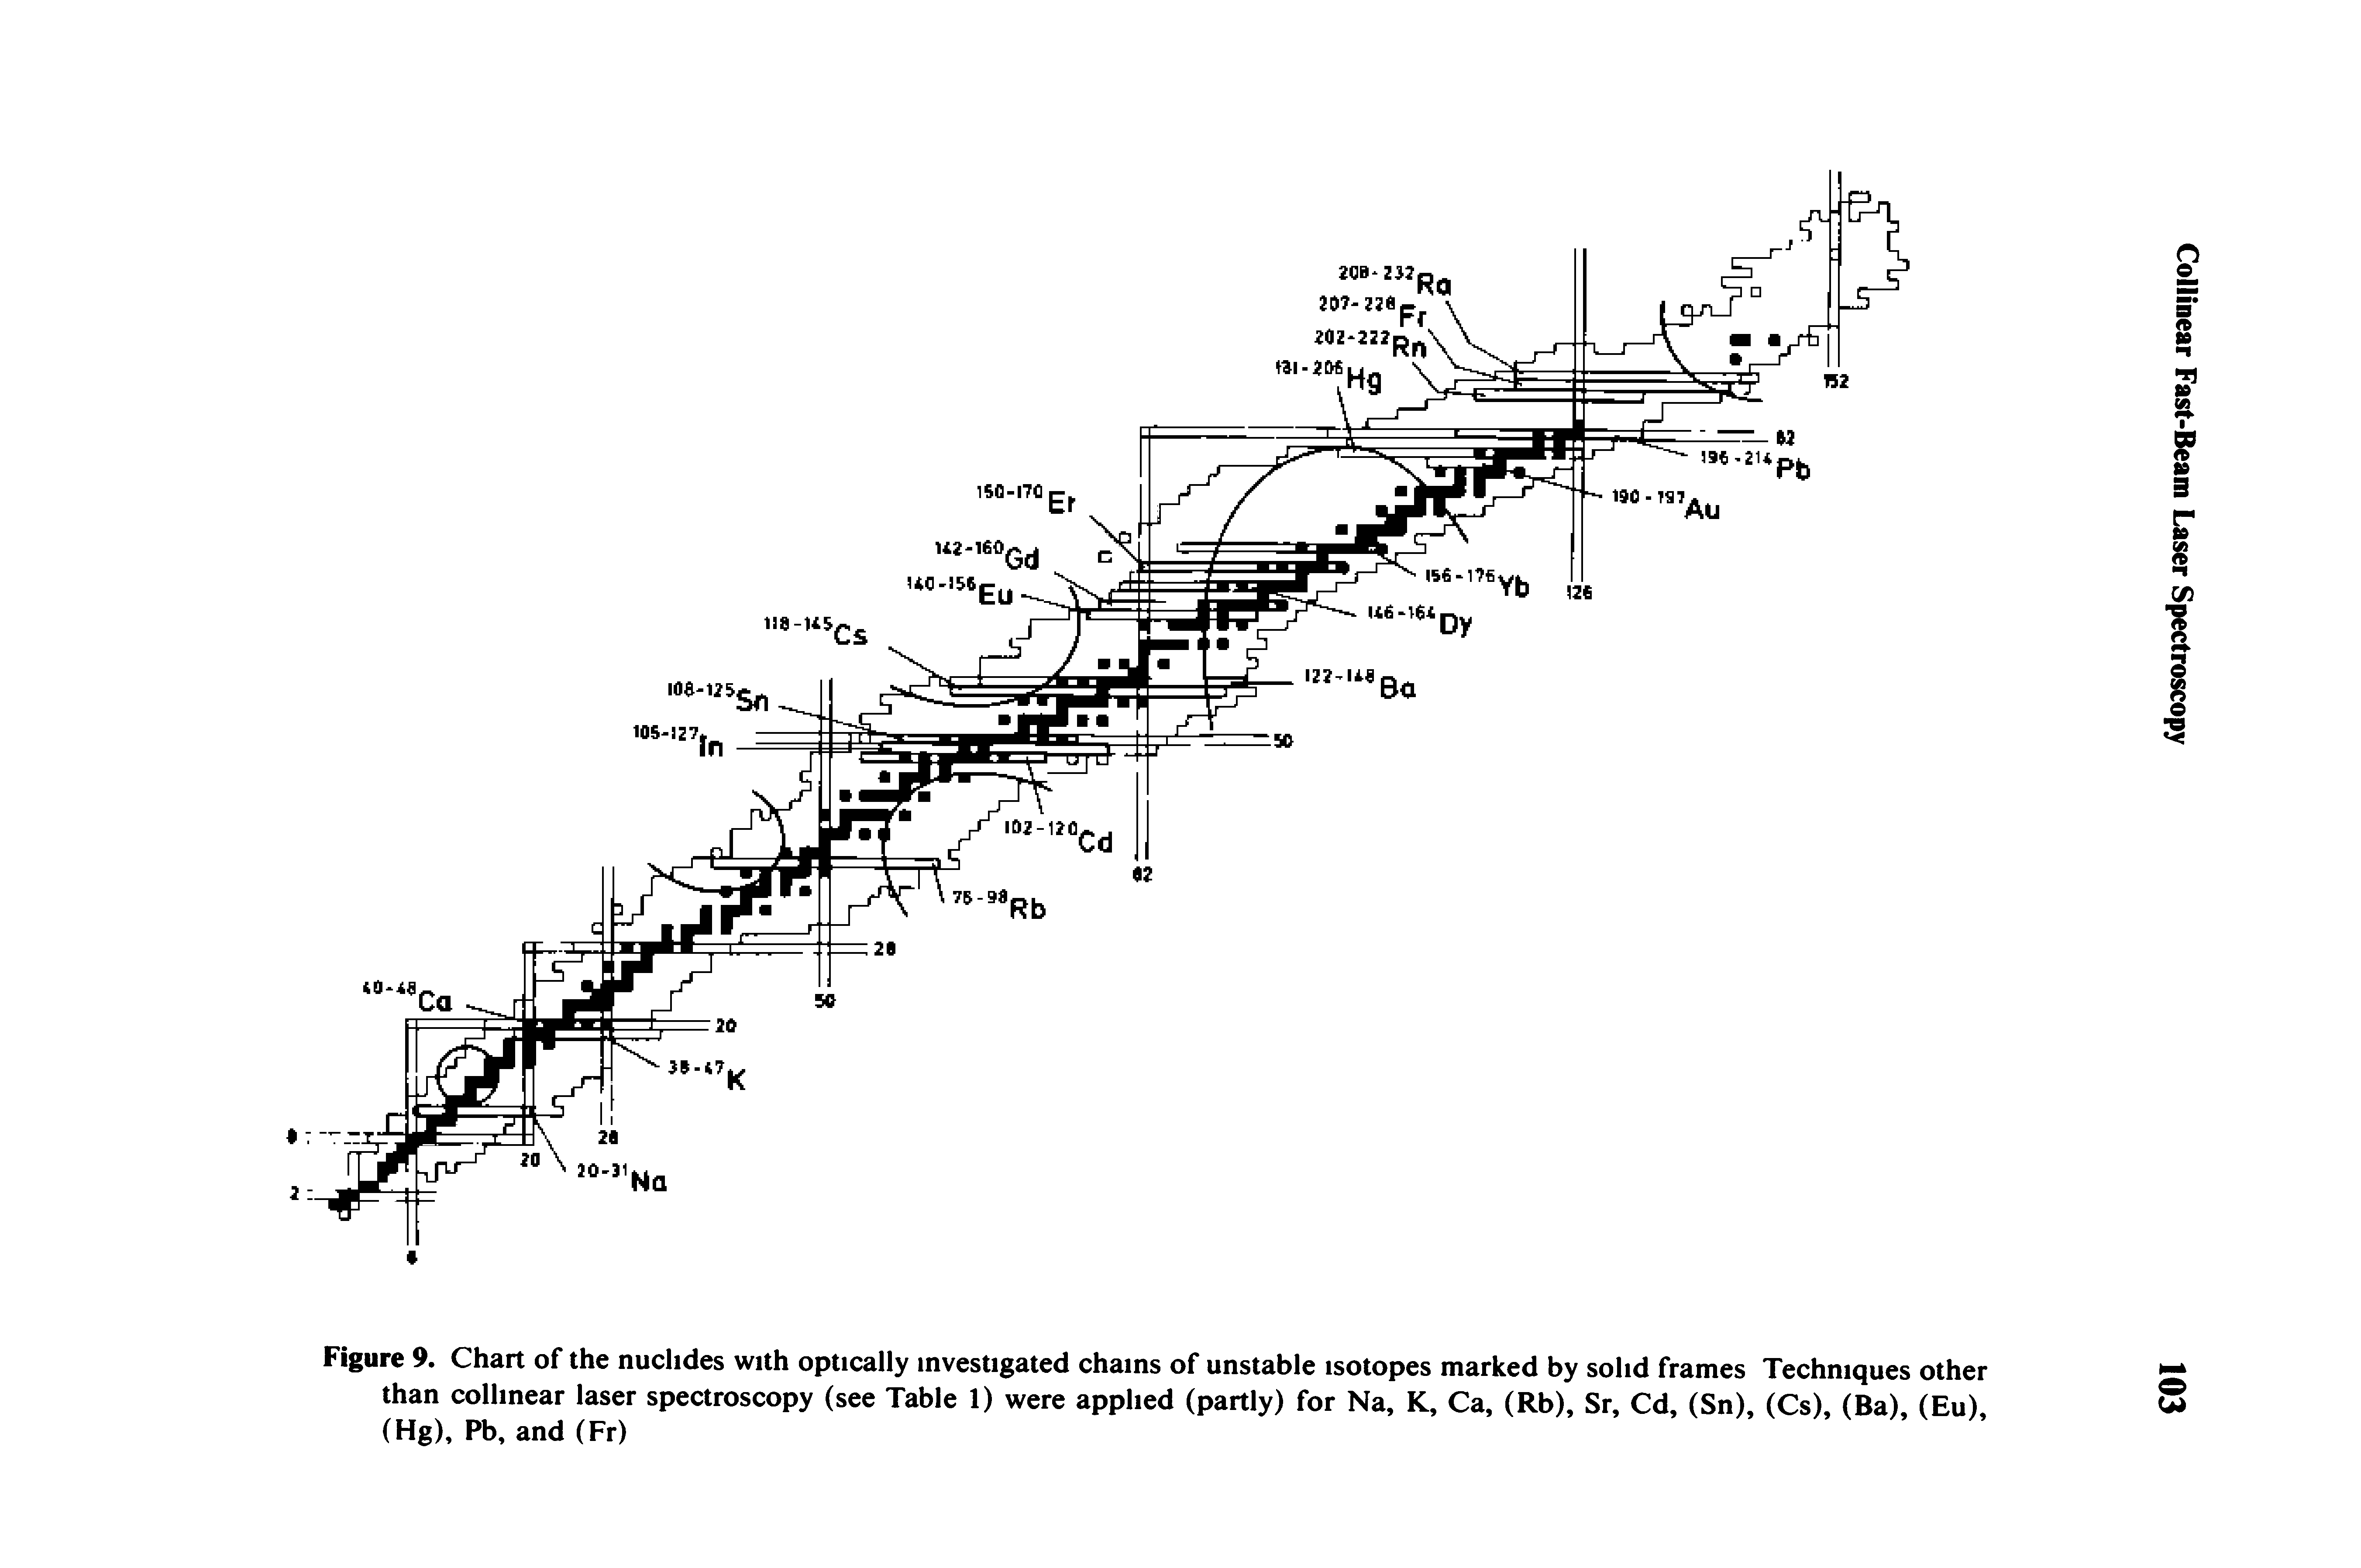 Figure 9. Chart of the nuclides with optically investigated chains of unstable isotopes marked by solid frames Techniques other than collinear laser spectroscopy (see Table 1) were applied (partly) for Na, K, Ca, (Rb), Sr, Cd, (Sn), (Cs), (Ba), (Eu), (Hg), Pb, and (Fr)...